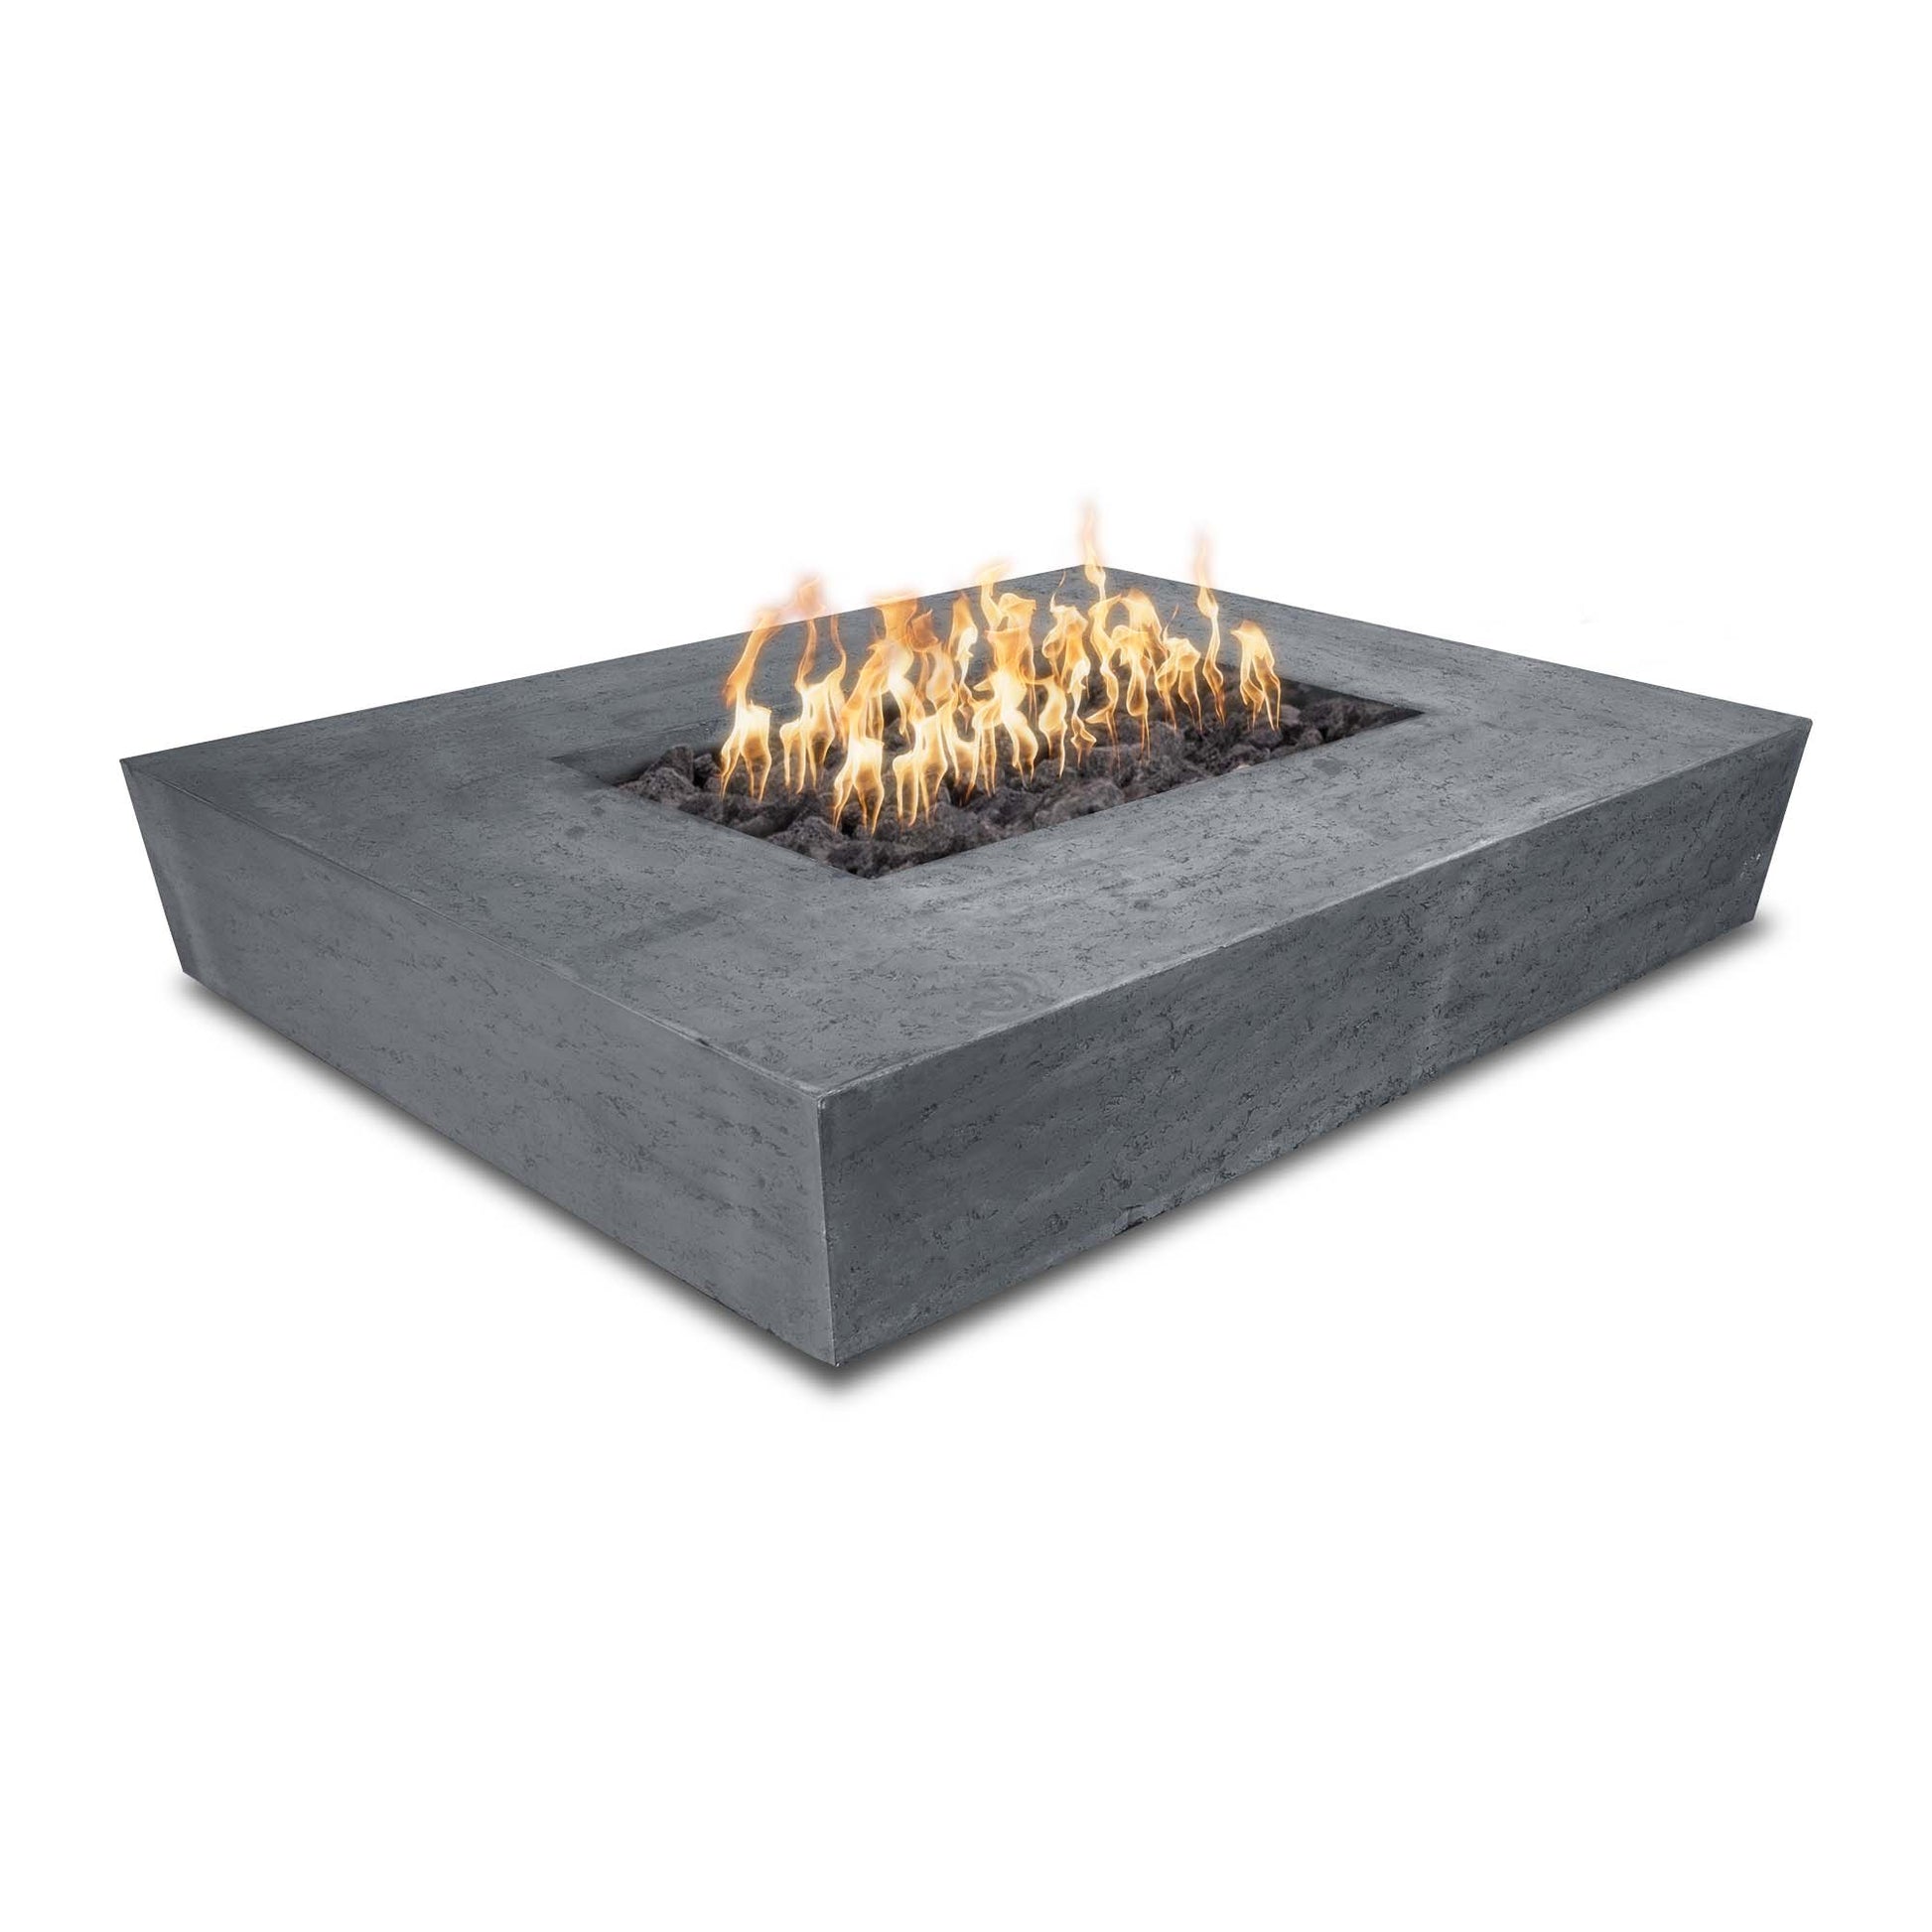 The Outdoor Plus Rectangular Heiko 58" Ash GFRC Concrete Liquid Propane Fire Pit with Match Lit with Flame Sense Ignition